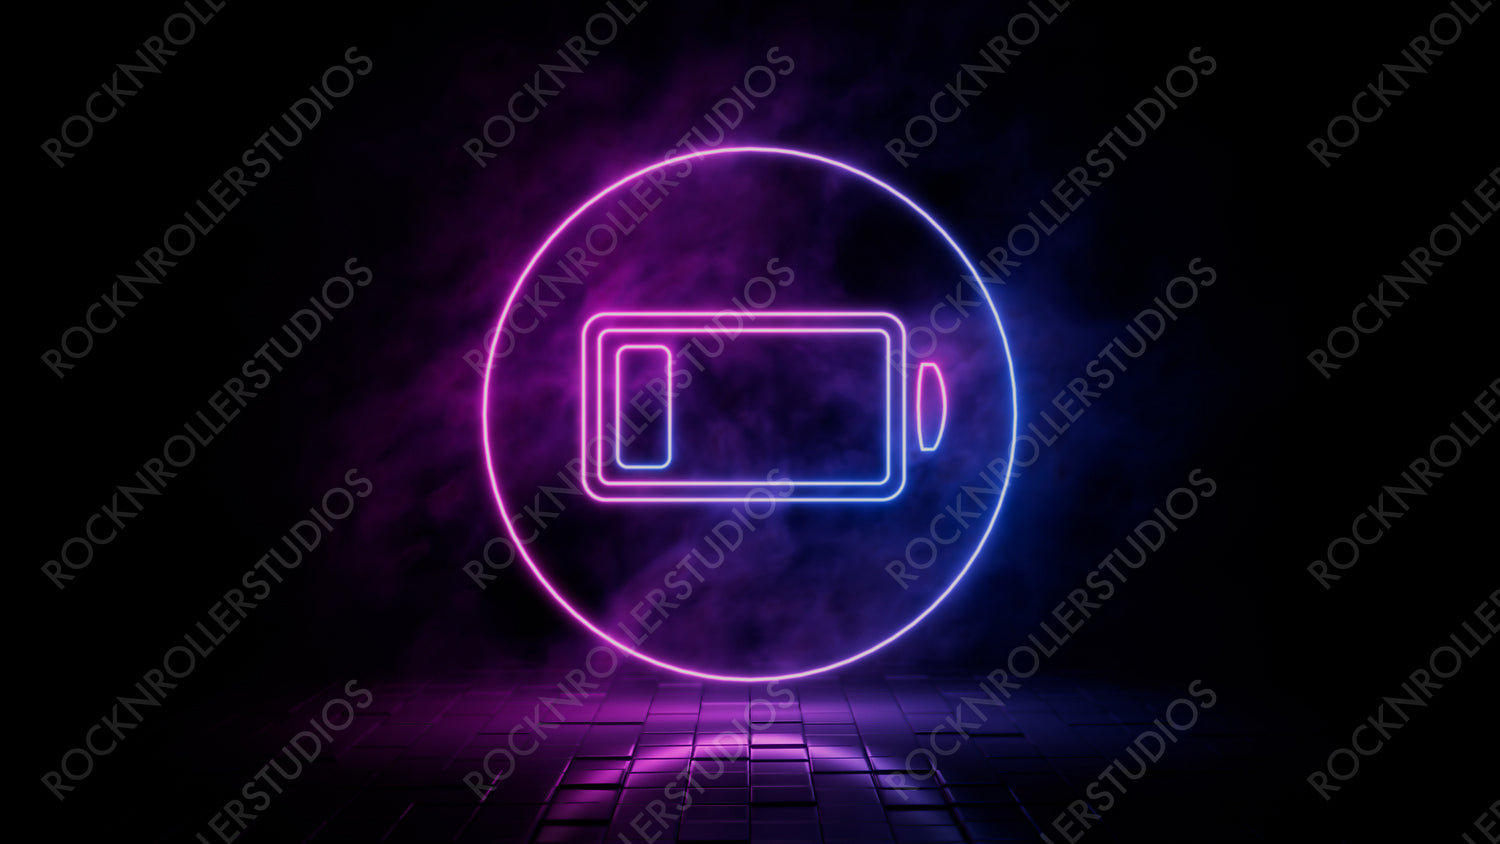 Pink and blue neon light low battery icon. Vibrant colored energy technology symbol, isolated on a black background. 3D Render